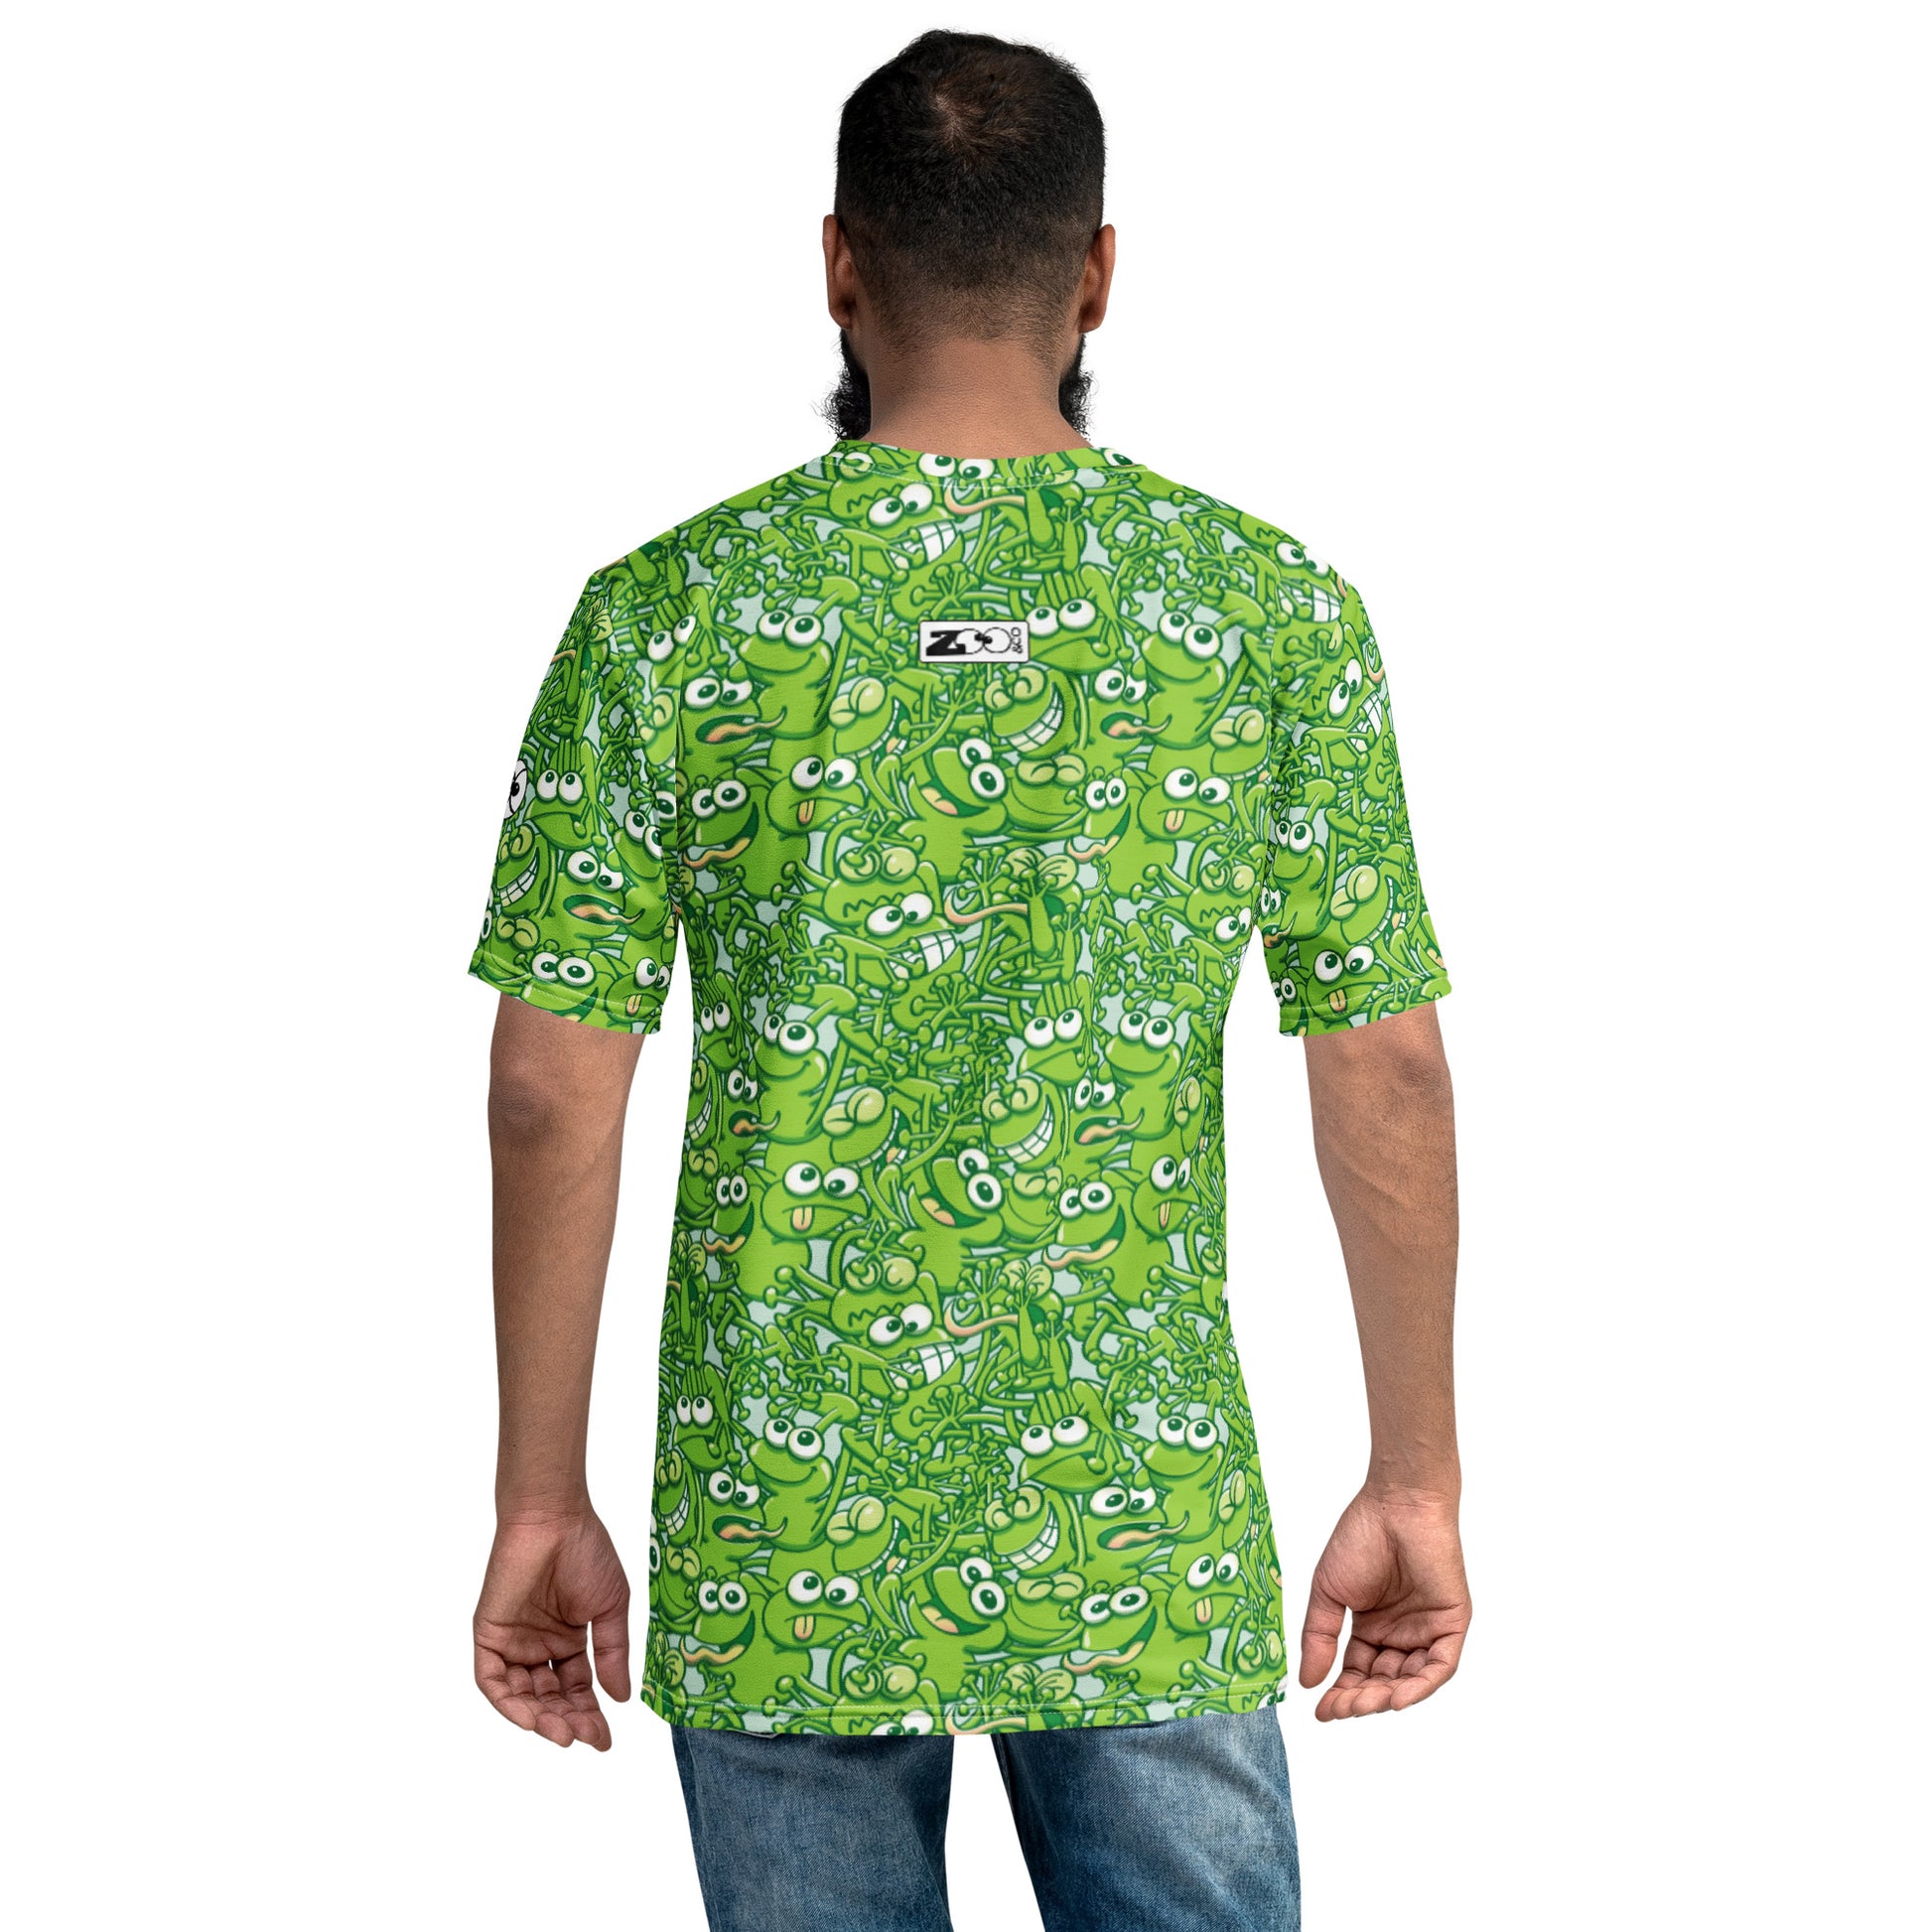 A tangled army of happy green frogs appears when the rain ends Men's t-shirt. Back view